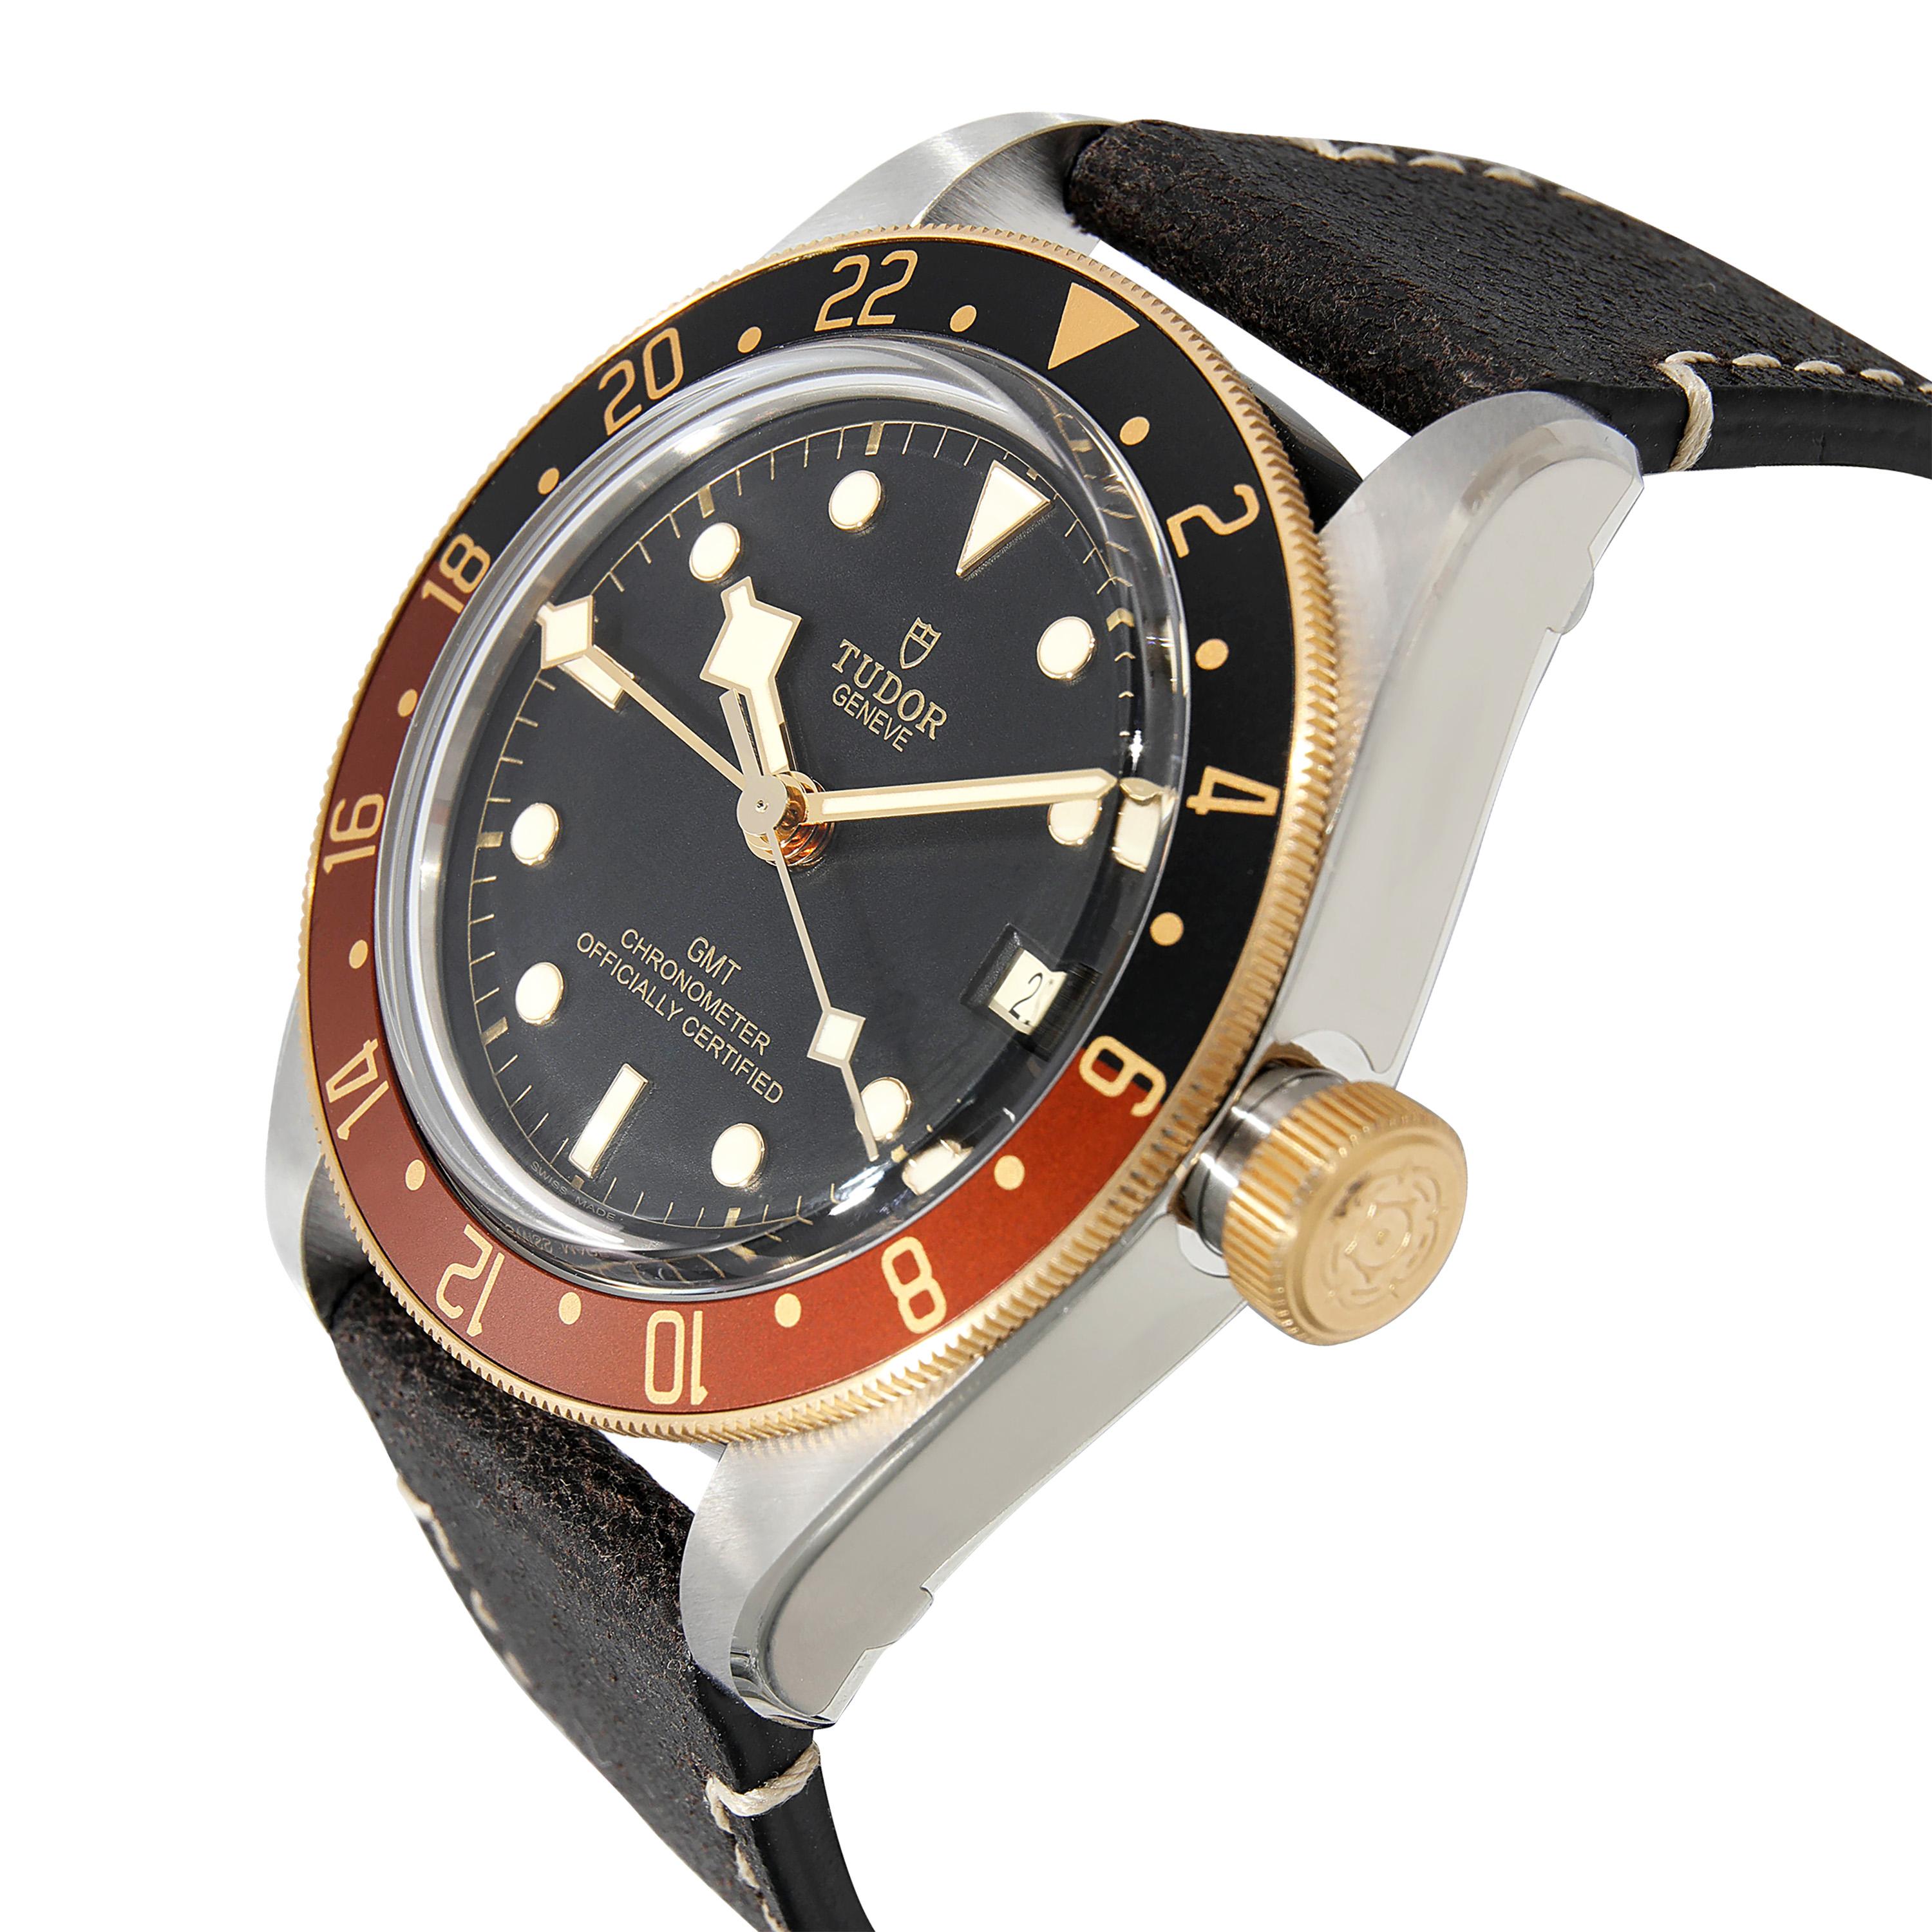 Tudor Black Bay GMT 79833MN Men's Watch in 18kt Stainless Steel/Yellow Gold In Excellent Condition For Sale In New York, NY